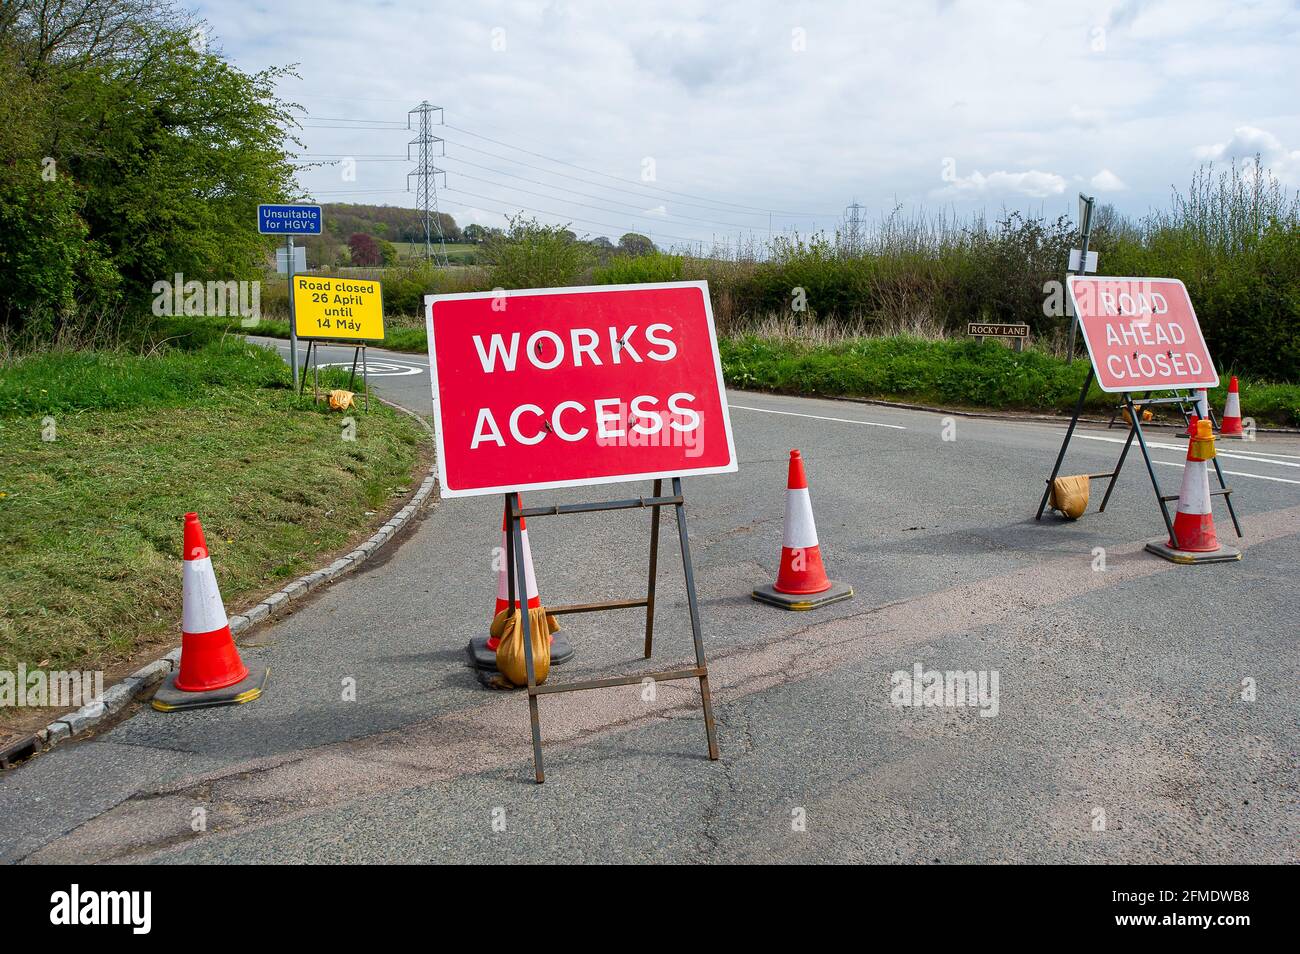 Aylesbury Vale, Buckinghamshire, UK. 29th April, 2021. HS2 have closed Rocky Road until 14th May 2021 for more work on the construction of the High Speed Rail from London to Birmingham. HS2 Security are stopping traffic and HS2 CCTV cameras are being used by HS2. HS2 have also closed a number of local footpaths including the bridleway from Rocky Lane to Durham Farm, however, none of the footpath closures are listed by Buckinghamshire Council on their website. Credit: Maureen McLean/Alamy Stock Photo